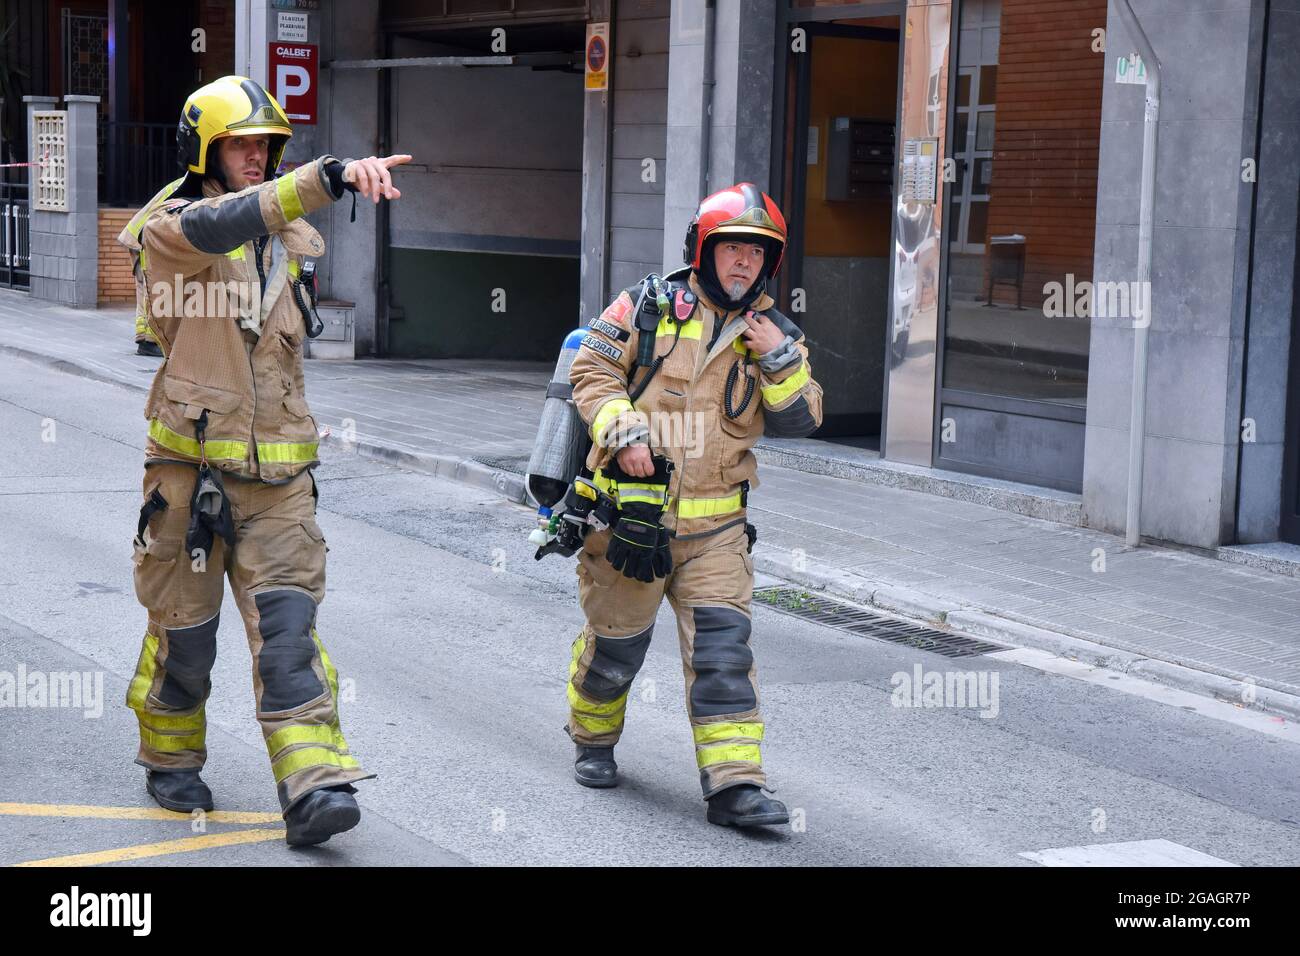 Two Catalonia firefighters seen during an inspection for a possible gas leak in Vendrell. A strong smell of gas alerted the residents of San Jordi Street, Vendrell where three teams of Catalonia Firefighters and several Local Police patrols attended closing access to the affected area. Firefighters with the help of technicians of the gas company began the gas measurements since the smell was coming from the underground sewer network and the presence of vapors or levels of propane, butane or natural gas was ruled out, hence a gas leak was ruled out and the possibility of a spill of some type of Stock Photo